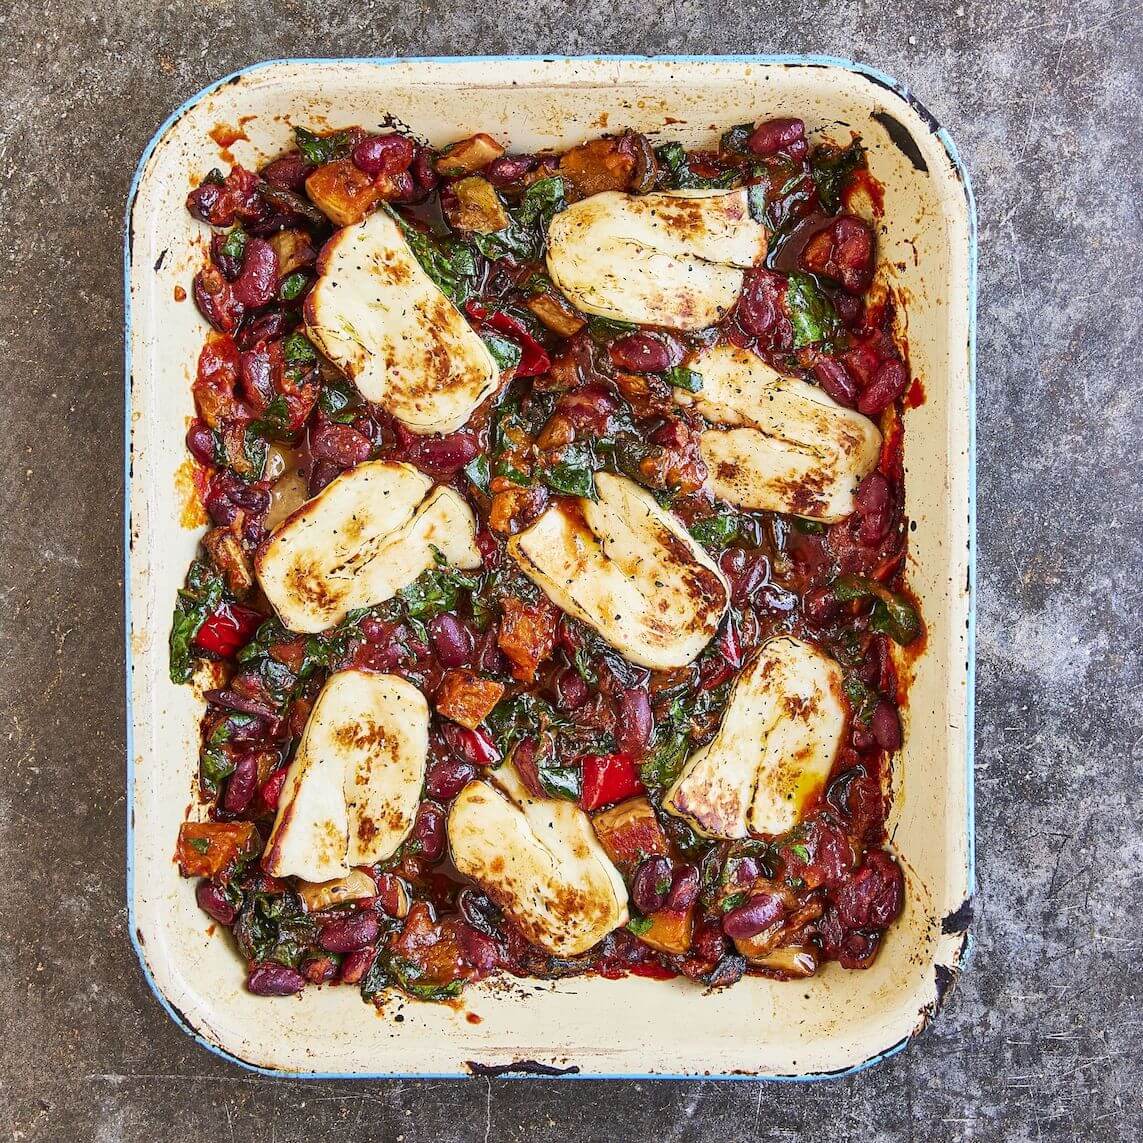 A spicy halloumi bake that’s moreish and nourishing